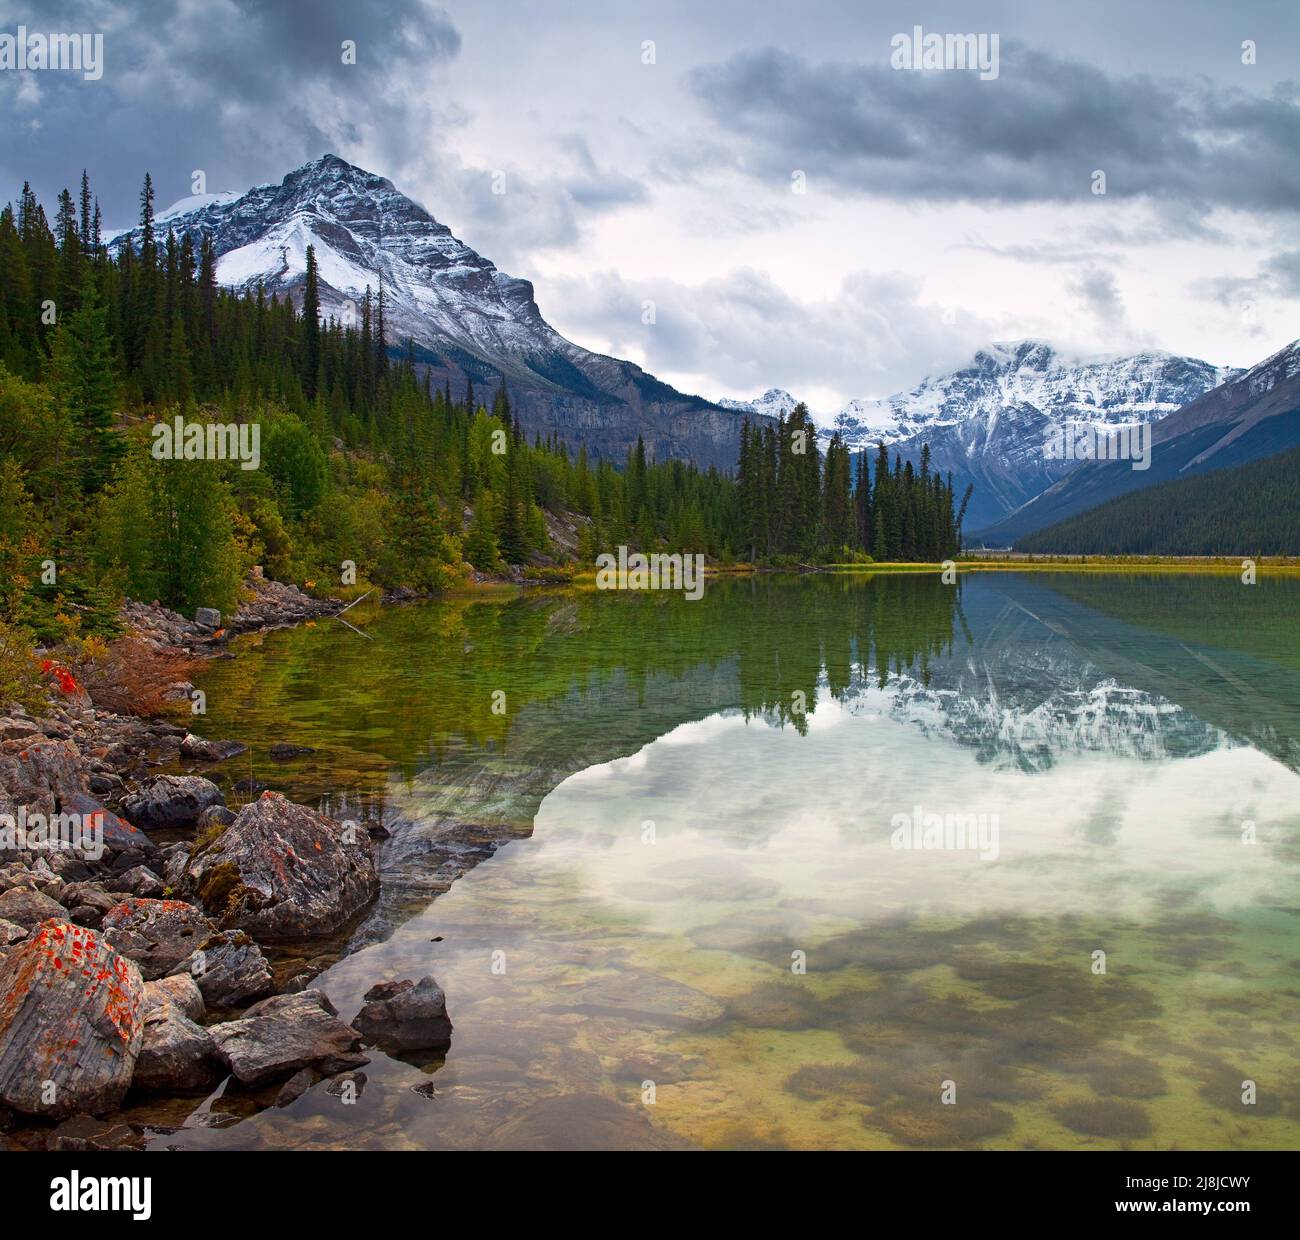 A mountain pond near Beauty Creek along the Icefield Parkway in Banff National Park, Alberta, Canada Stock Photo